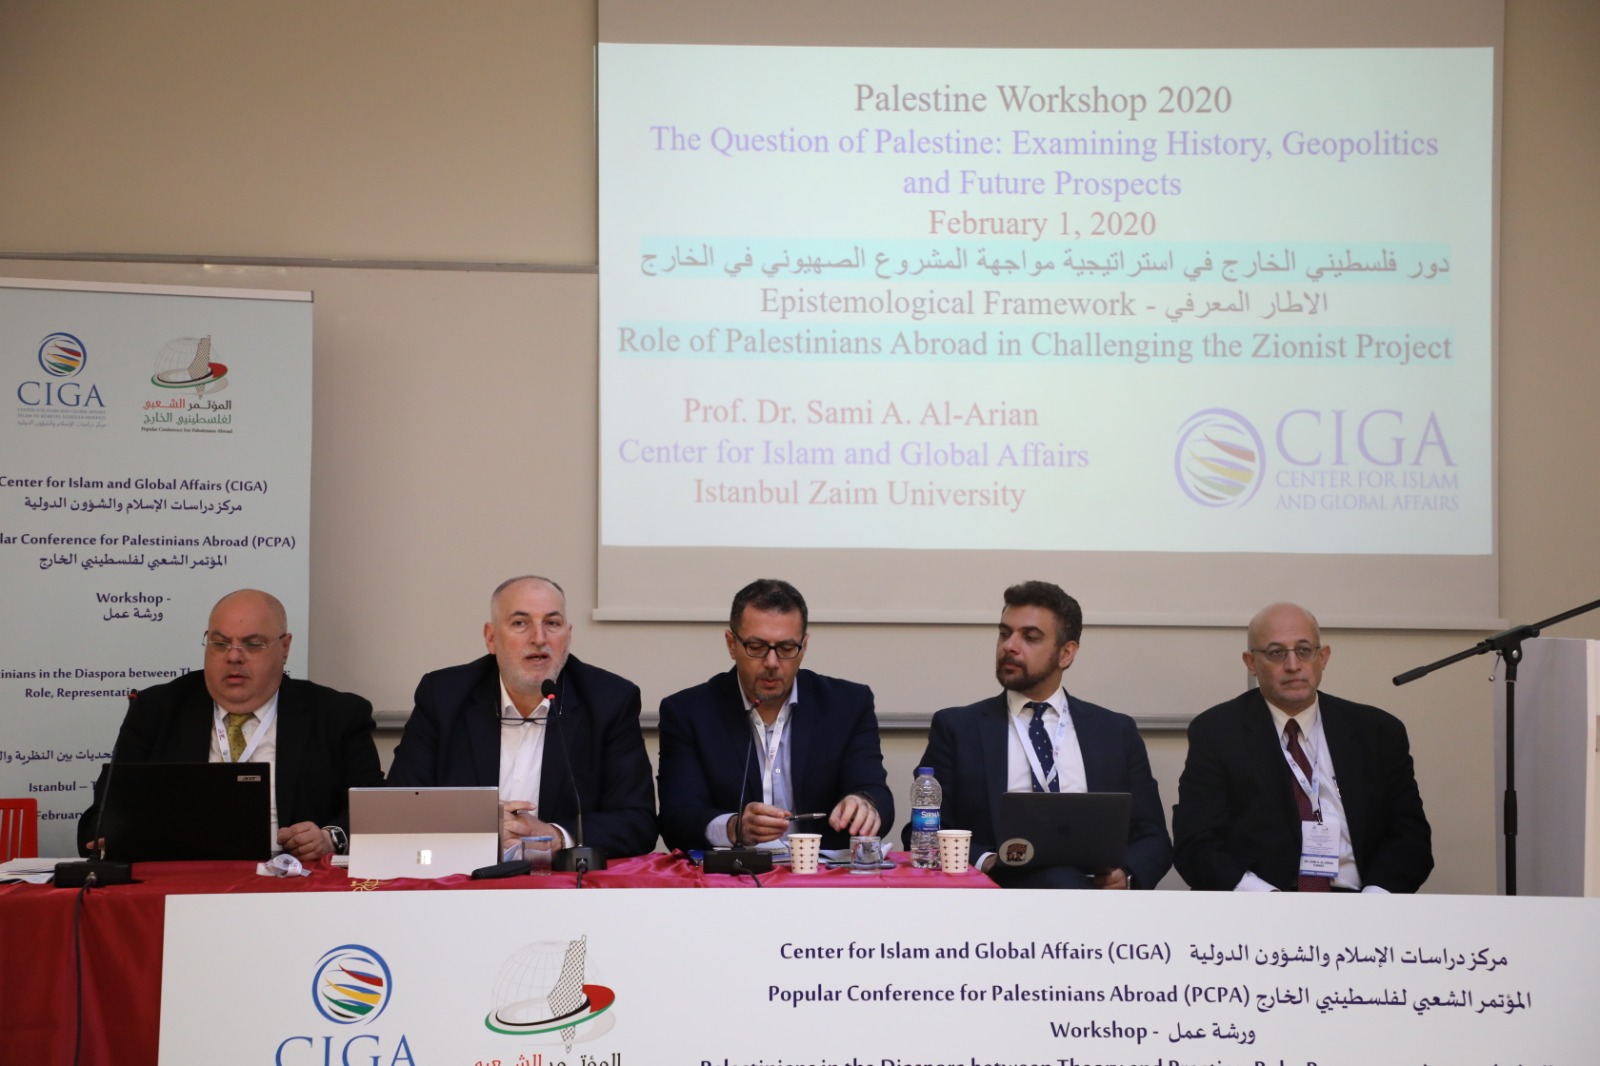 Role of Palestinians Abroad in Challenging the Zionist Project" Symposium Held in Istanbul"